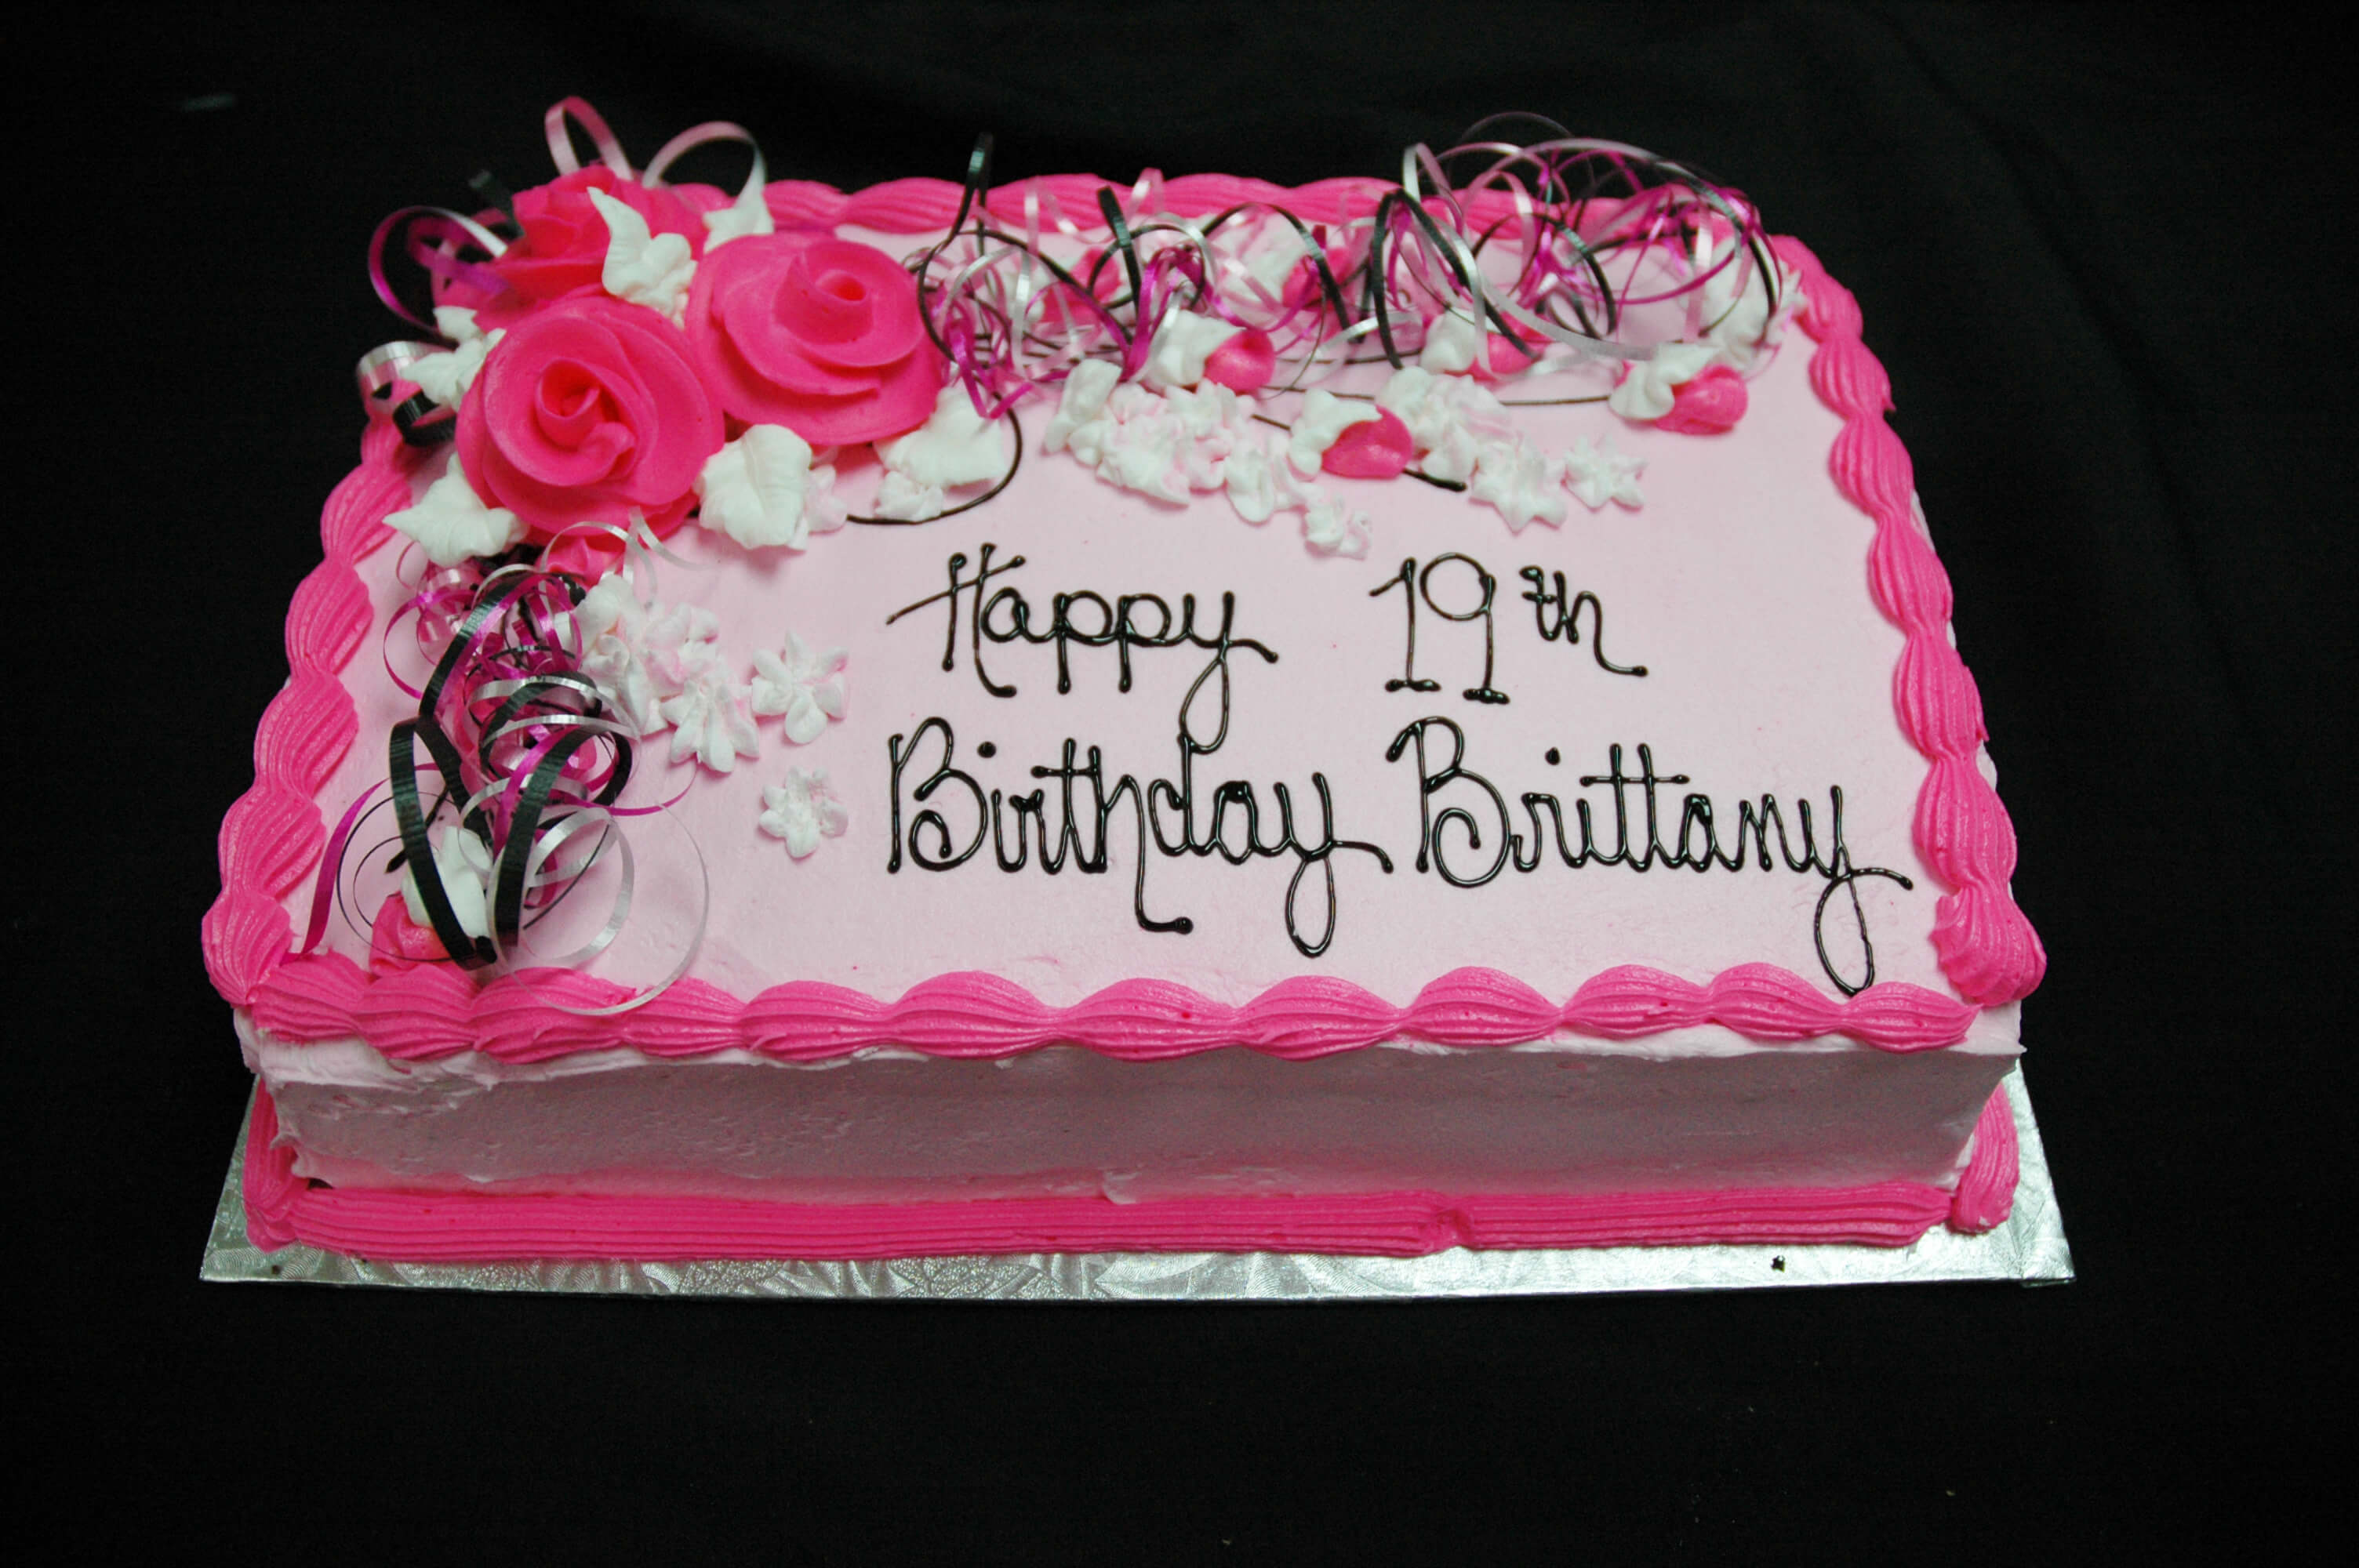 McArthur's Bakery Custom Cake with Hot Pink Roses and Ribbon